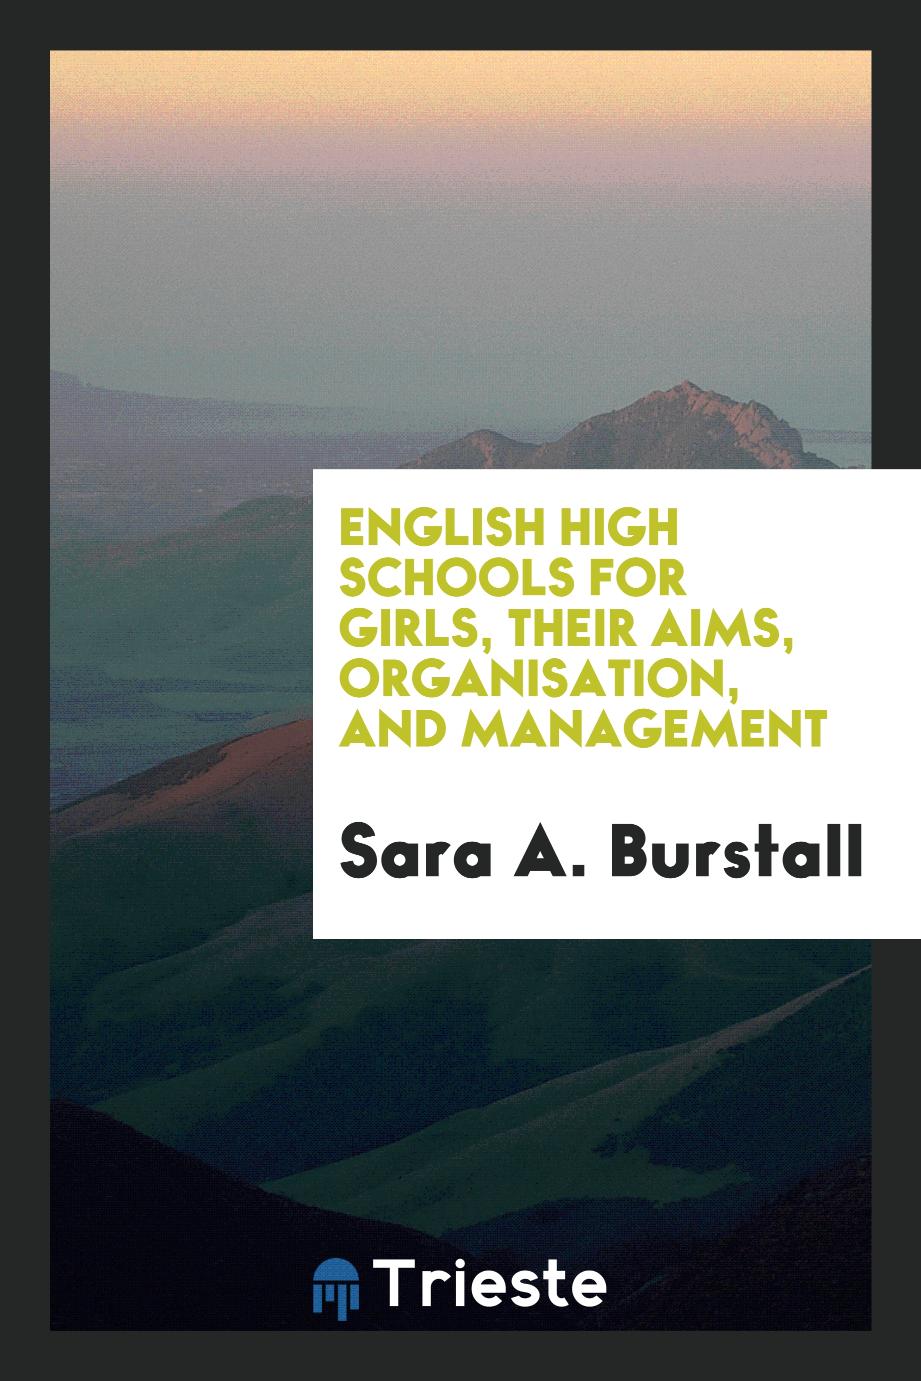 English high schools for girls, their aims, organisation, and management